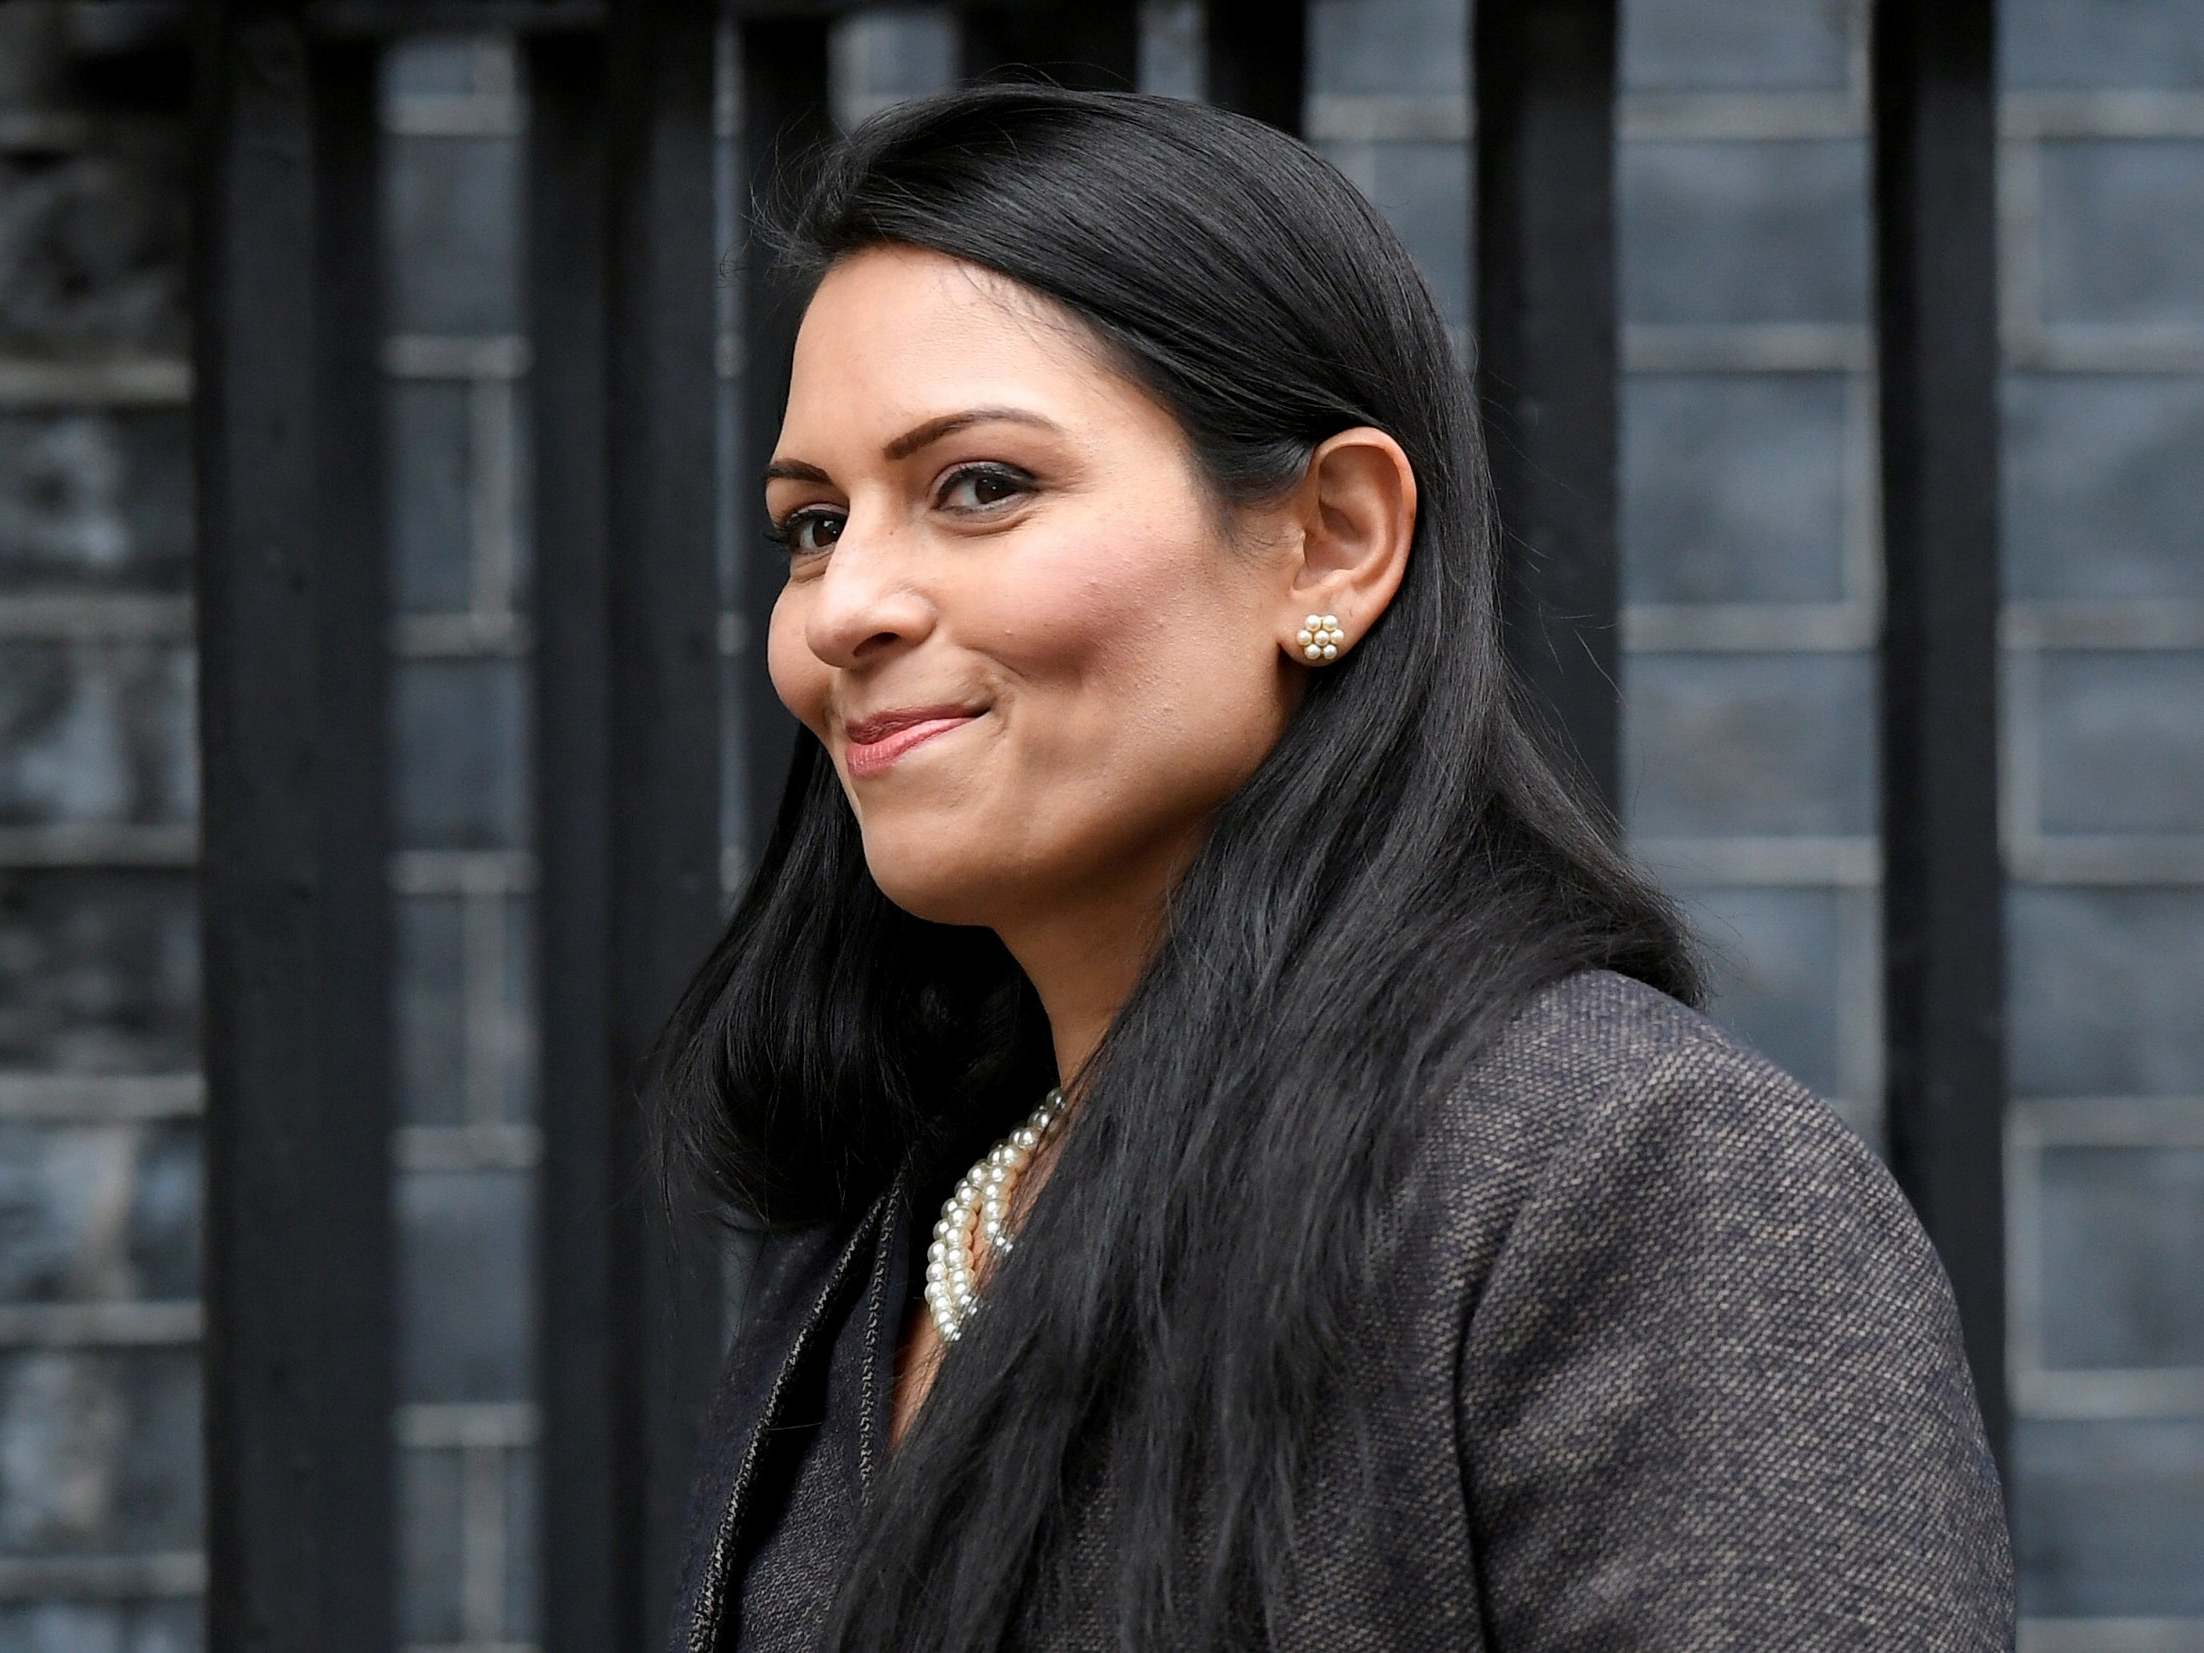 Priti Patel says shes minded to formally legalise poppers The Independent The Independent photo photo